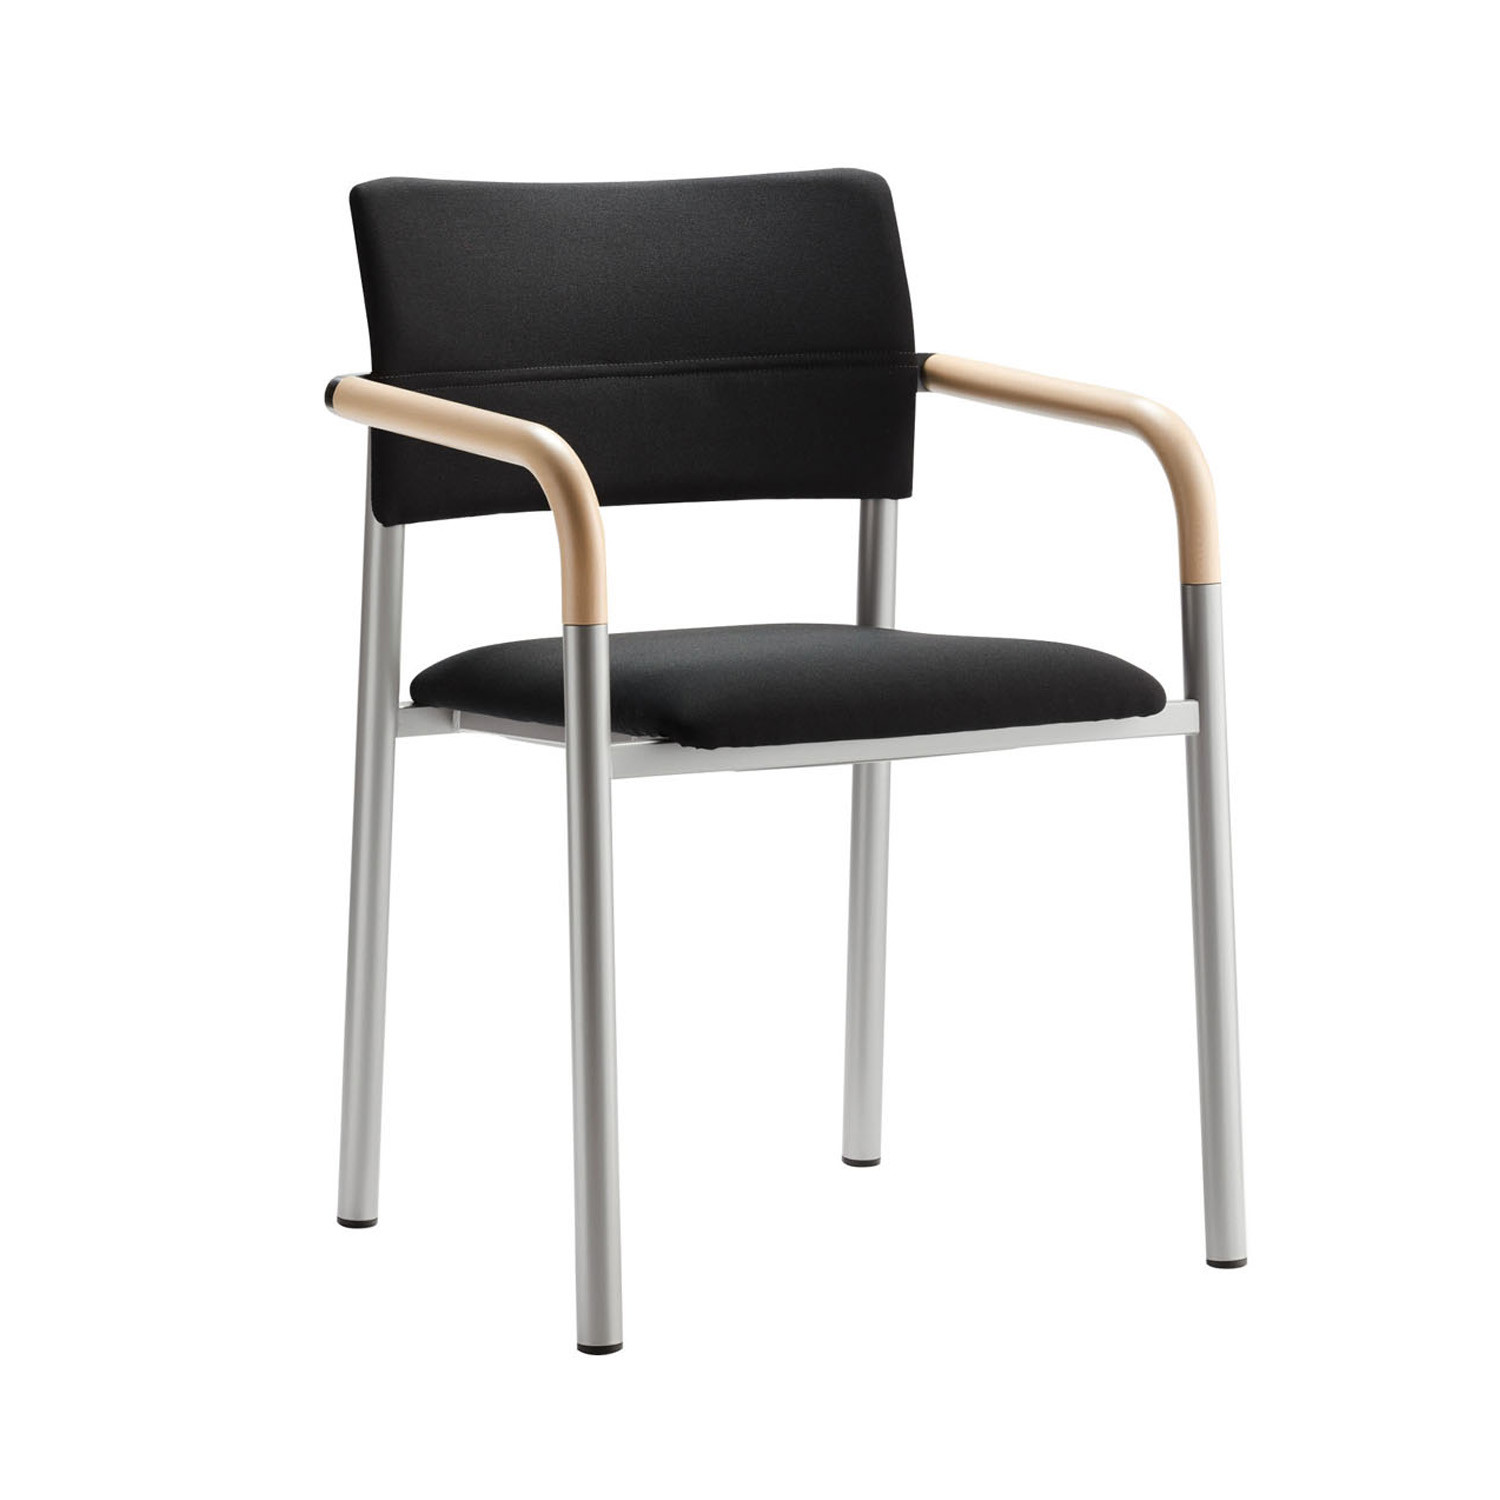 Aluform_3 Stacking Chair